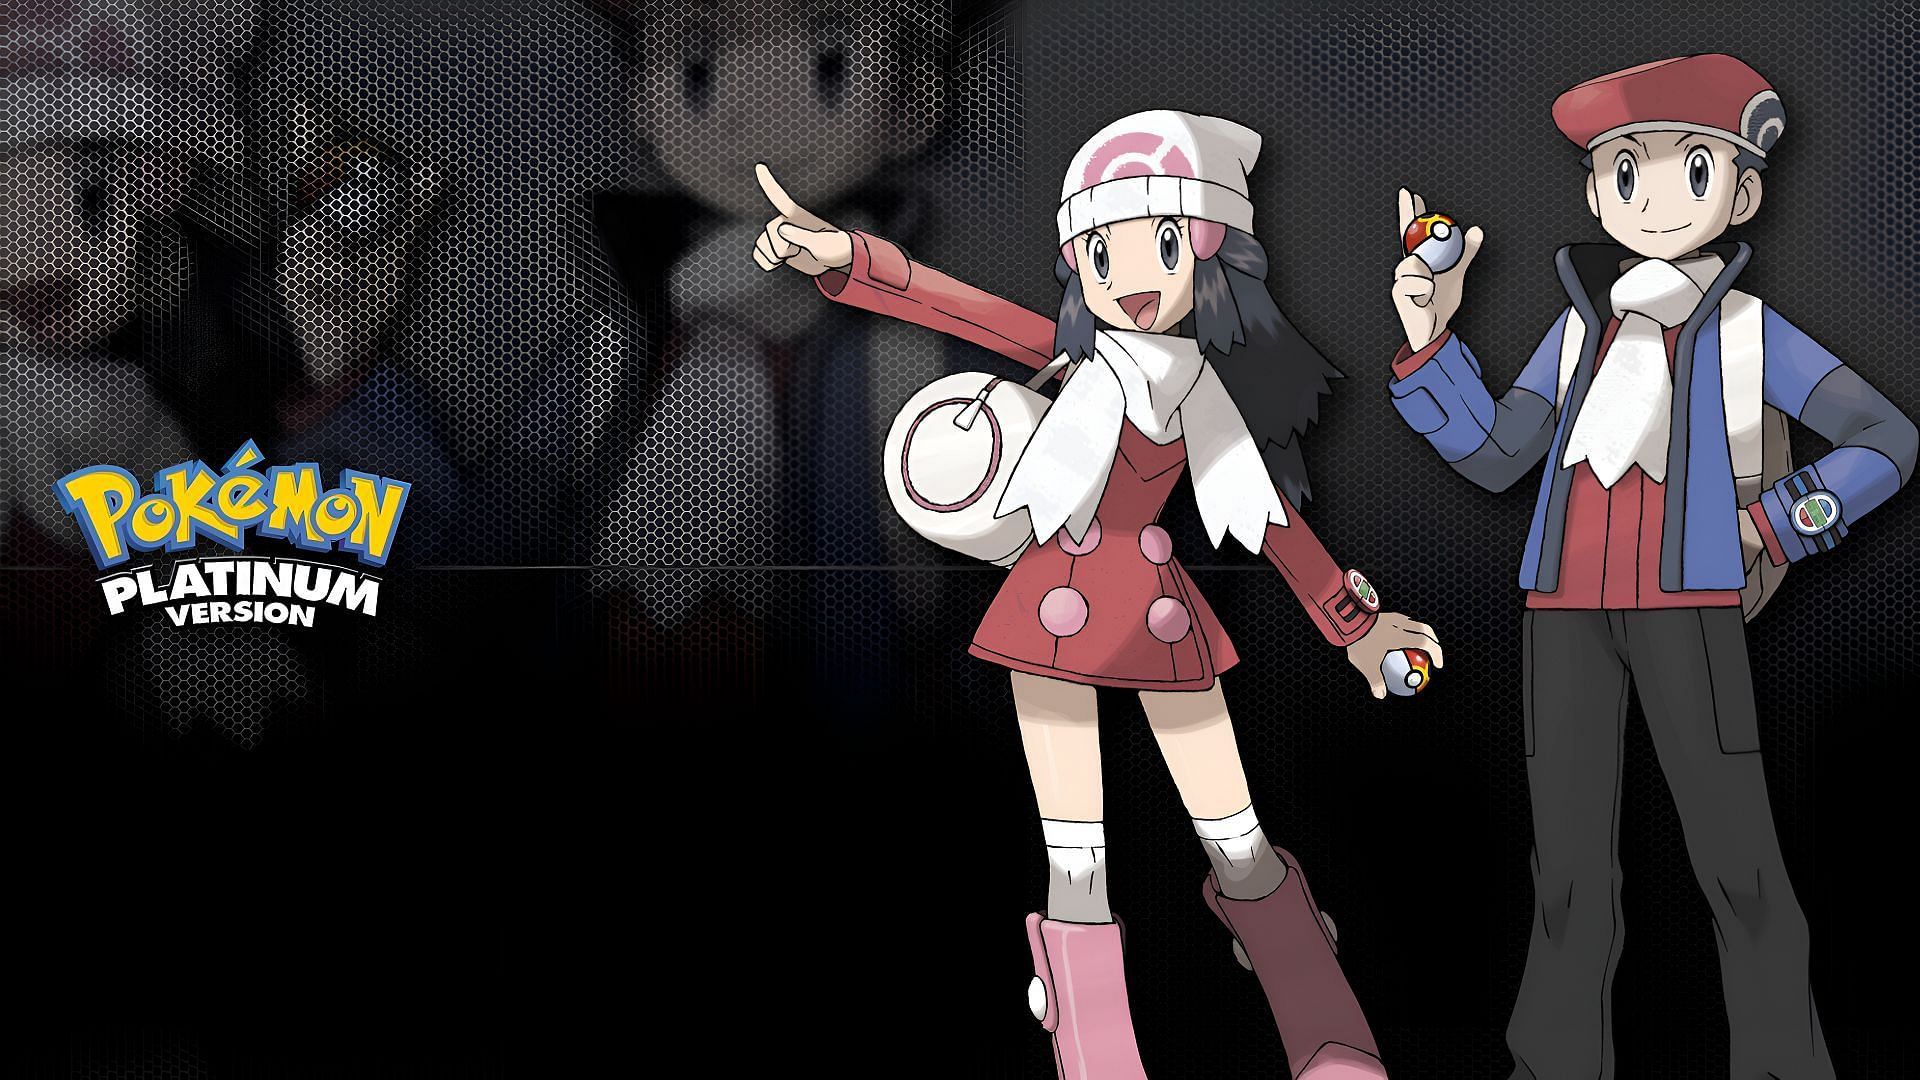 Pokemon: Platinum Version remains one of the most beloved in the franchise (Image via Game Freak)